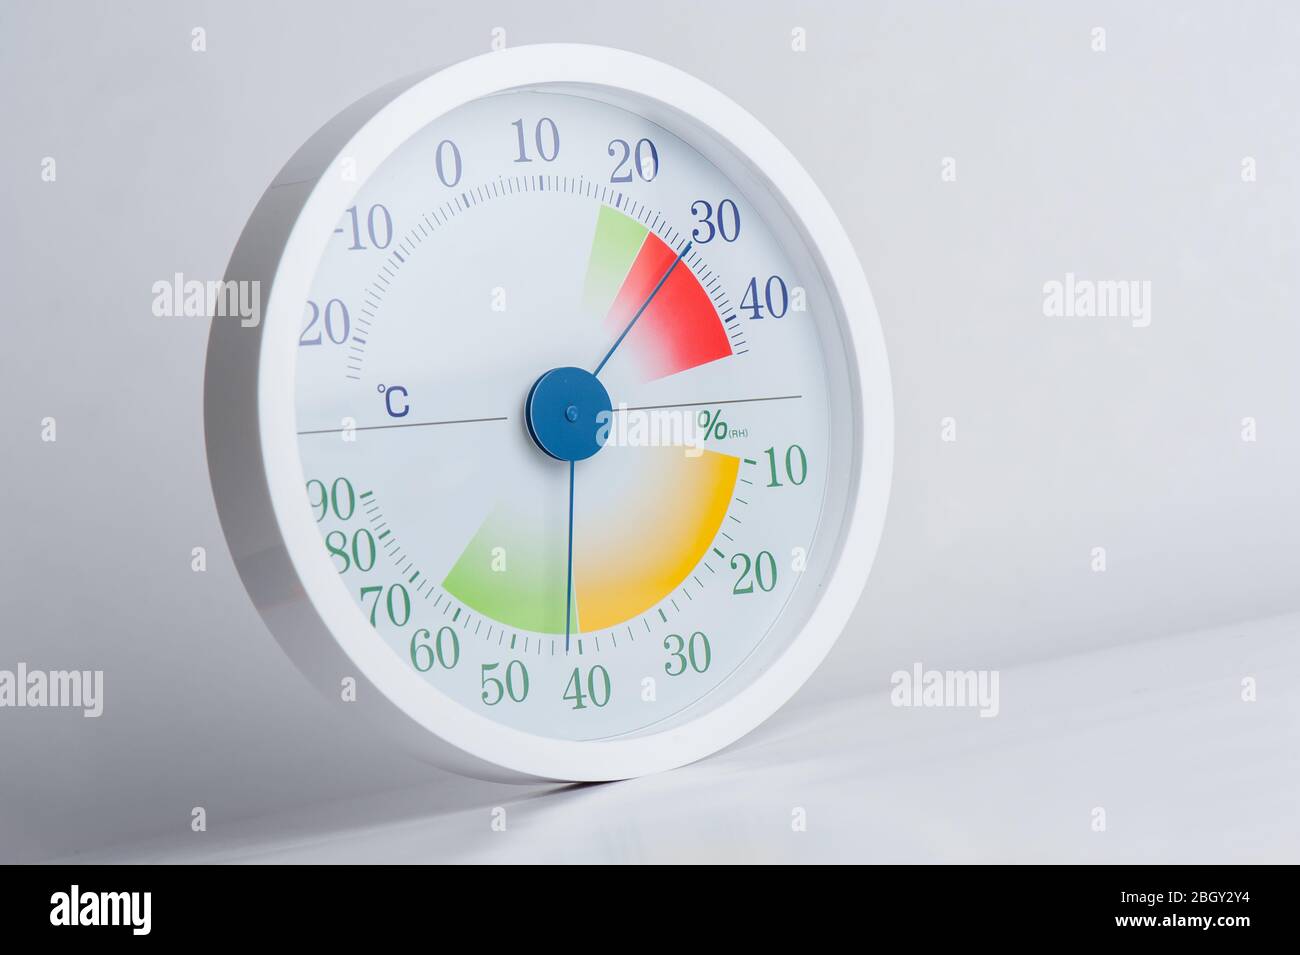 Modern Round Barometer Thermometer Hygrometer Analog Device For Measuring  Humidity Temperature And Atmospheric Pressure Stock Photo - Download Image  Now - iStock